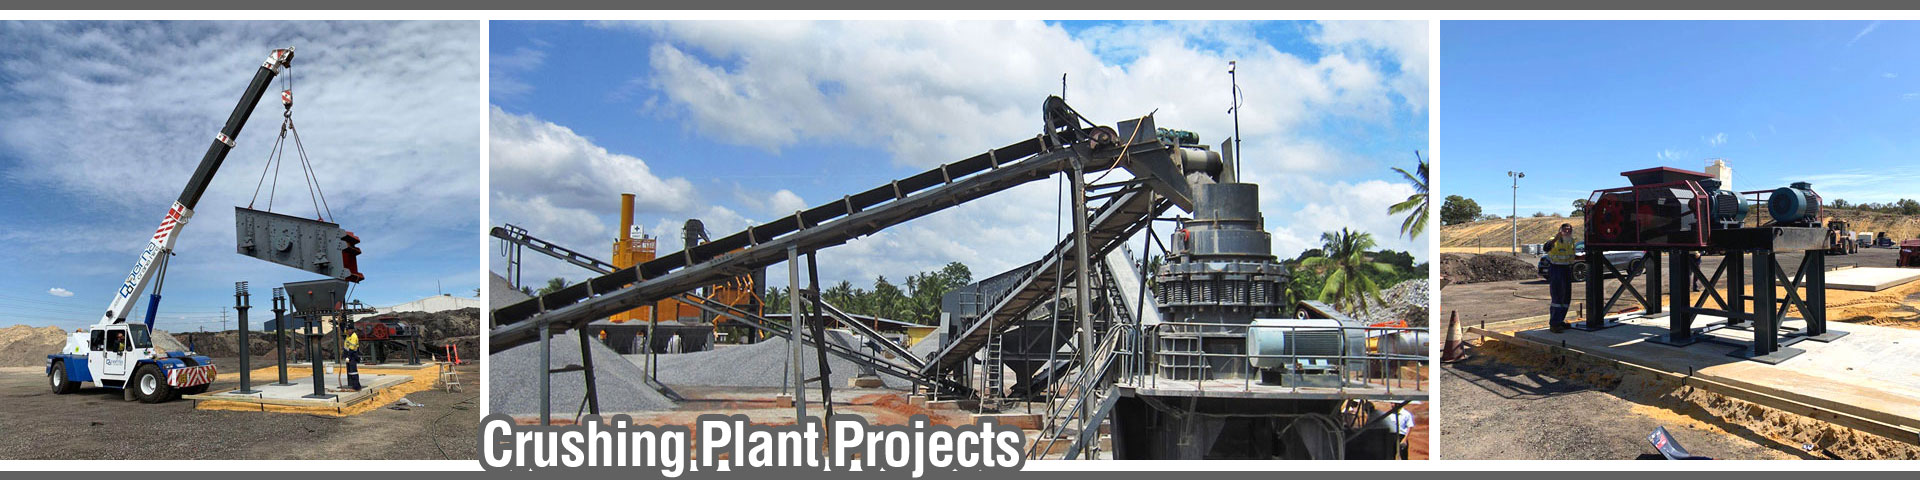 Crushing plant projects